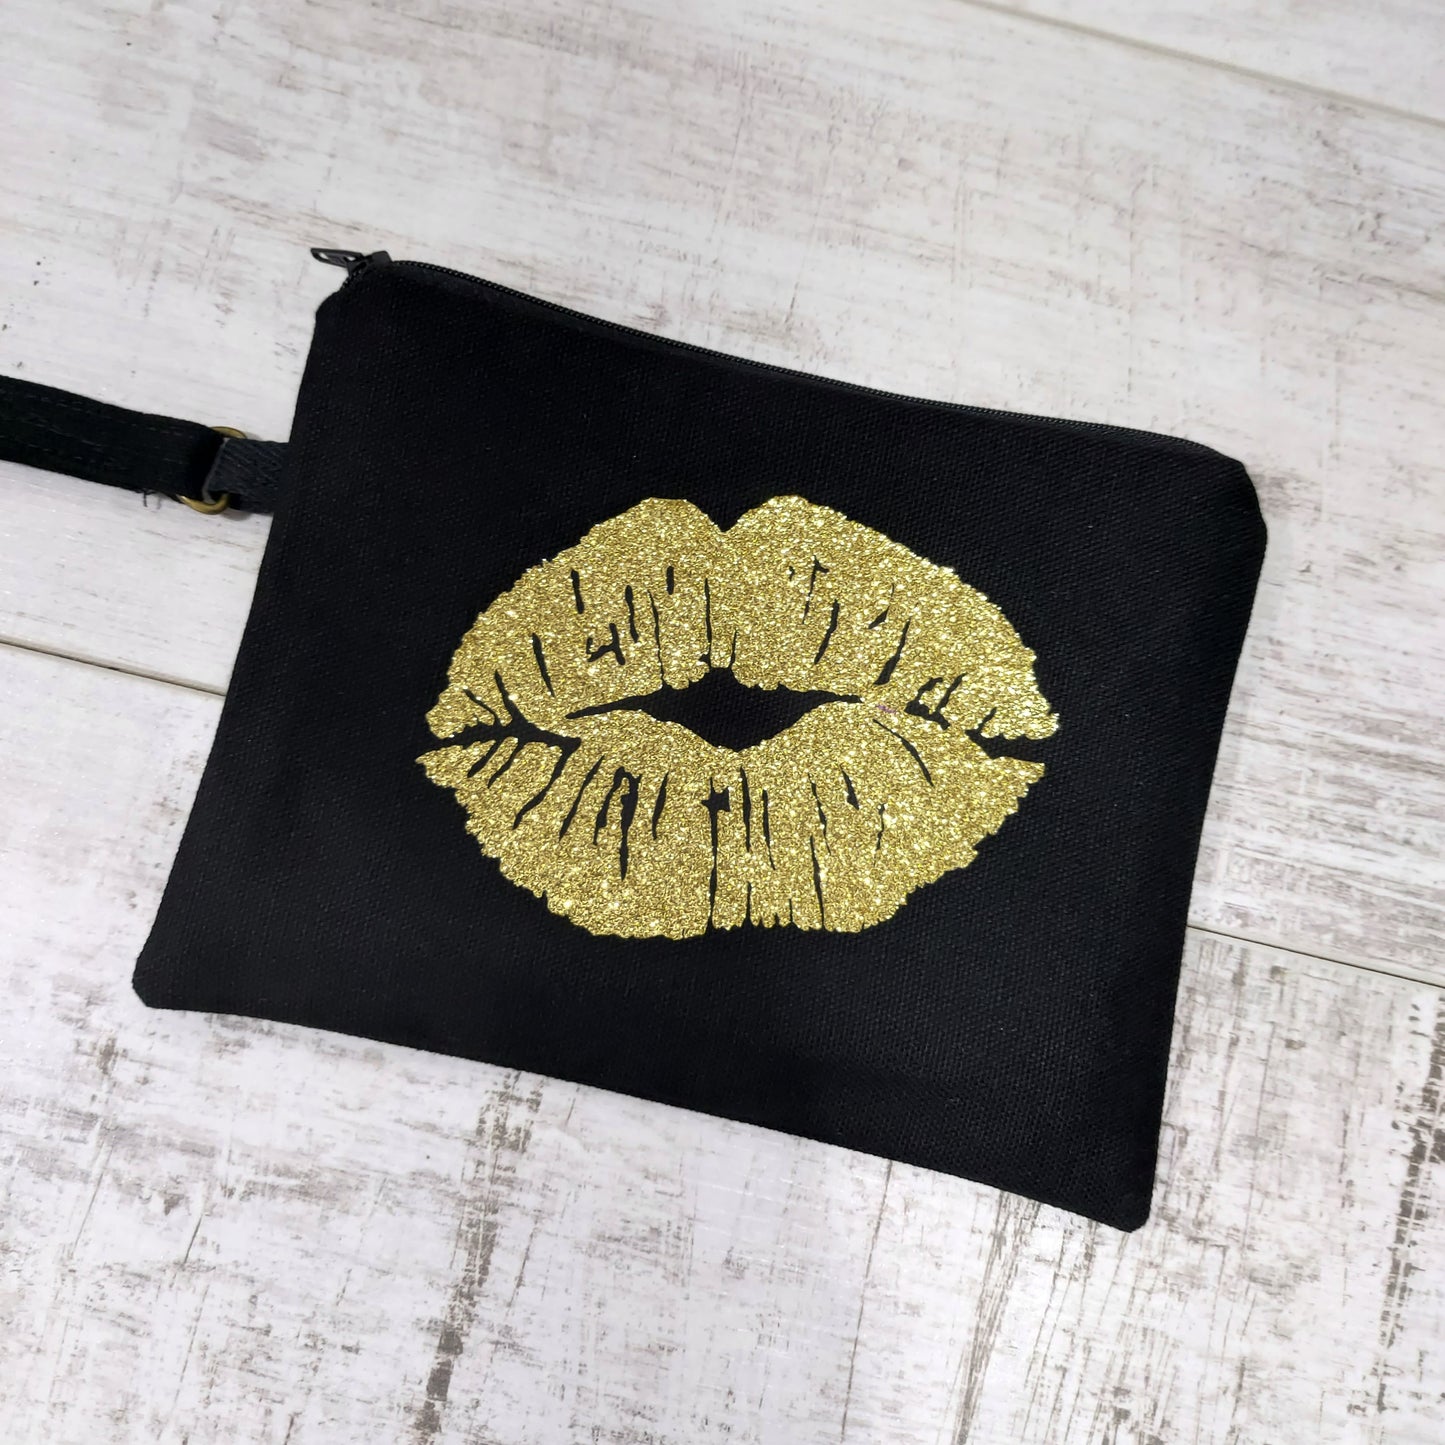 Glitter Lips Wristlet Bag in Red or Gold